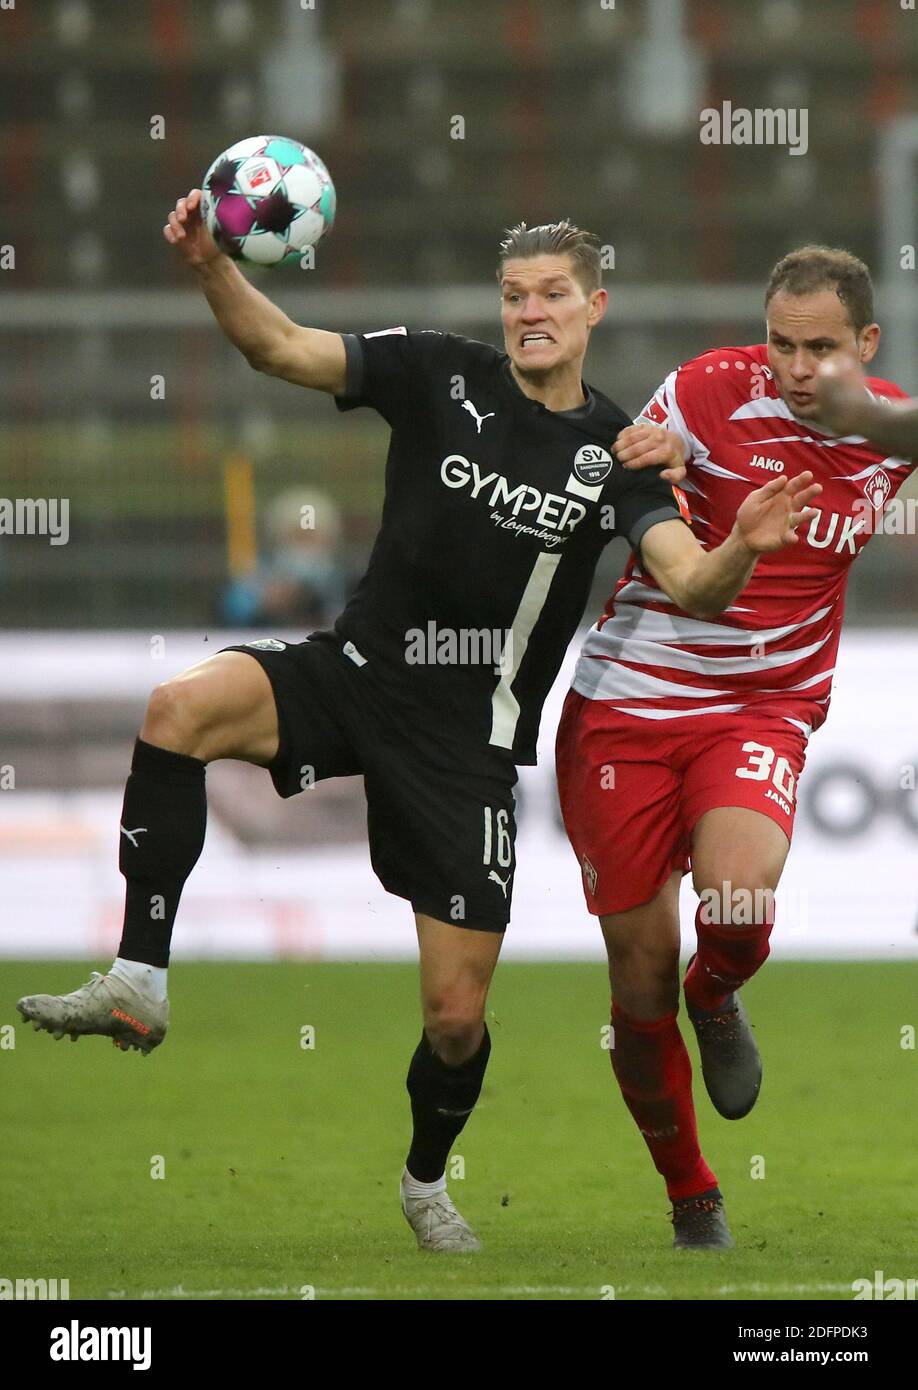 06 December 2020, Bavaria, Würzburg: Football: 2nd Bundesliga, Würzburger Kickers - SV Sandhausen, 10th matchday, in the Flyeralarm Arena. The Würzburger Ewerton (r) fights for the ball with Kevin Behrens from Sandhausen. Photo: Daniel Karmann/dpa - IMPORTANT NOTE: In accordance with the regulations of the DFL Deutsche Fußball Liga and the DFB Deutscher Fußball-Bund, it is prohibited to exploit or have exploited in the stadium and/or from the game taken photographs in the form of sequence images and/or video-like photo series. Stock Photo